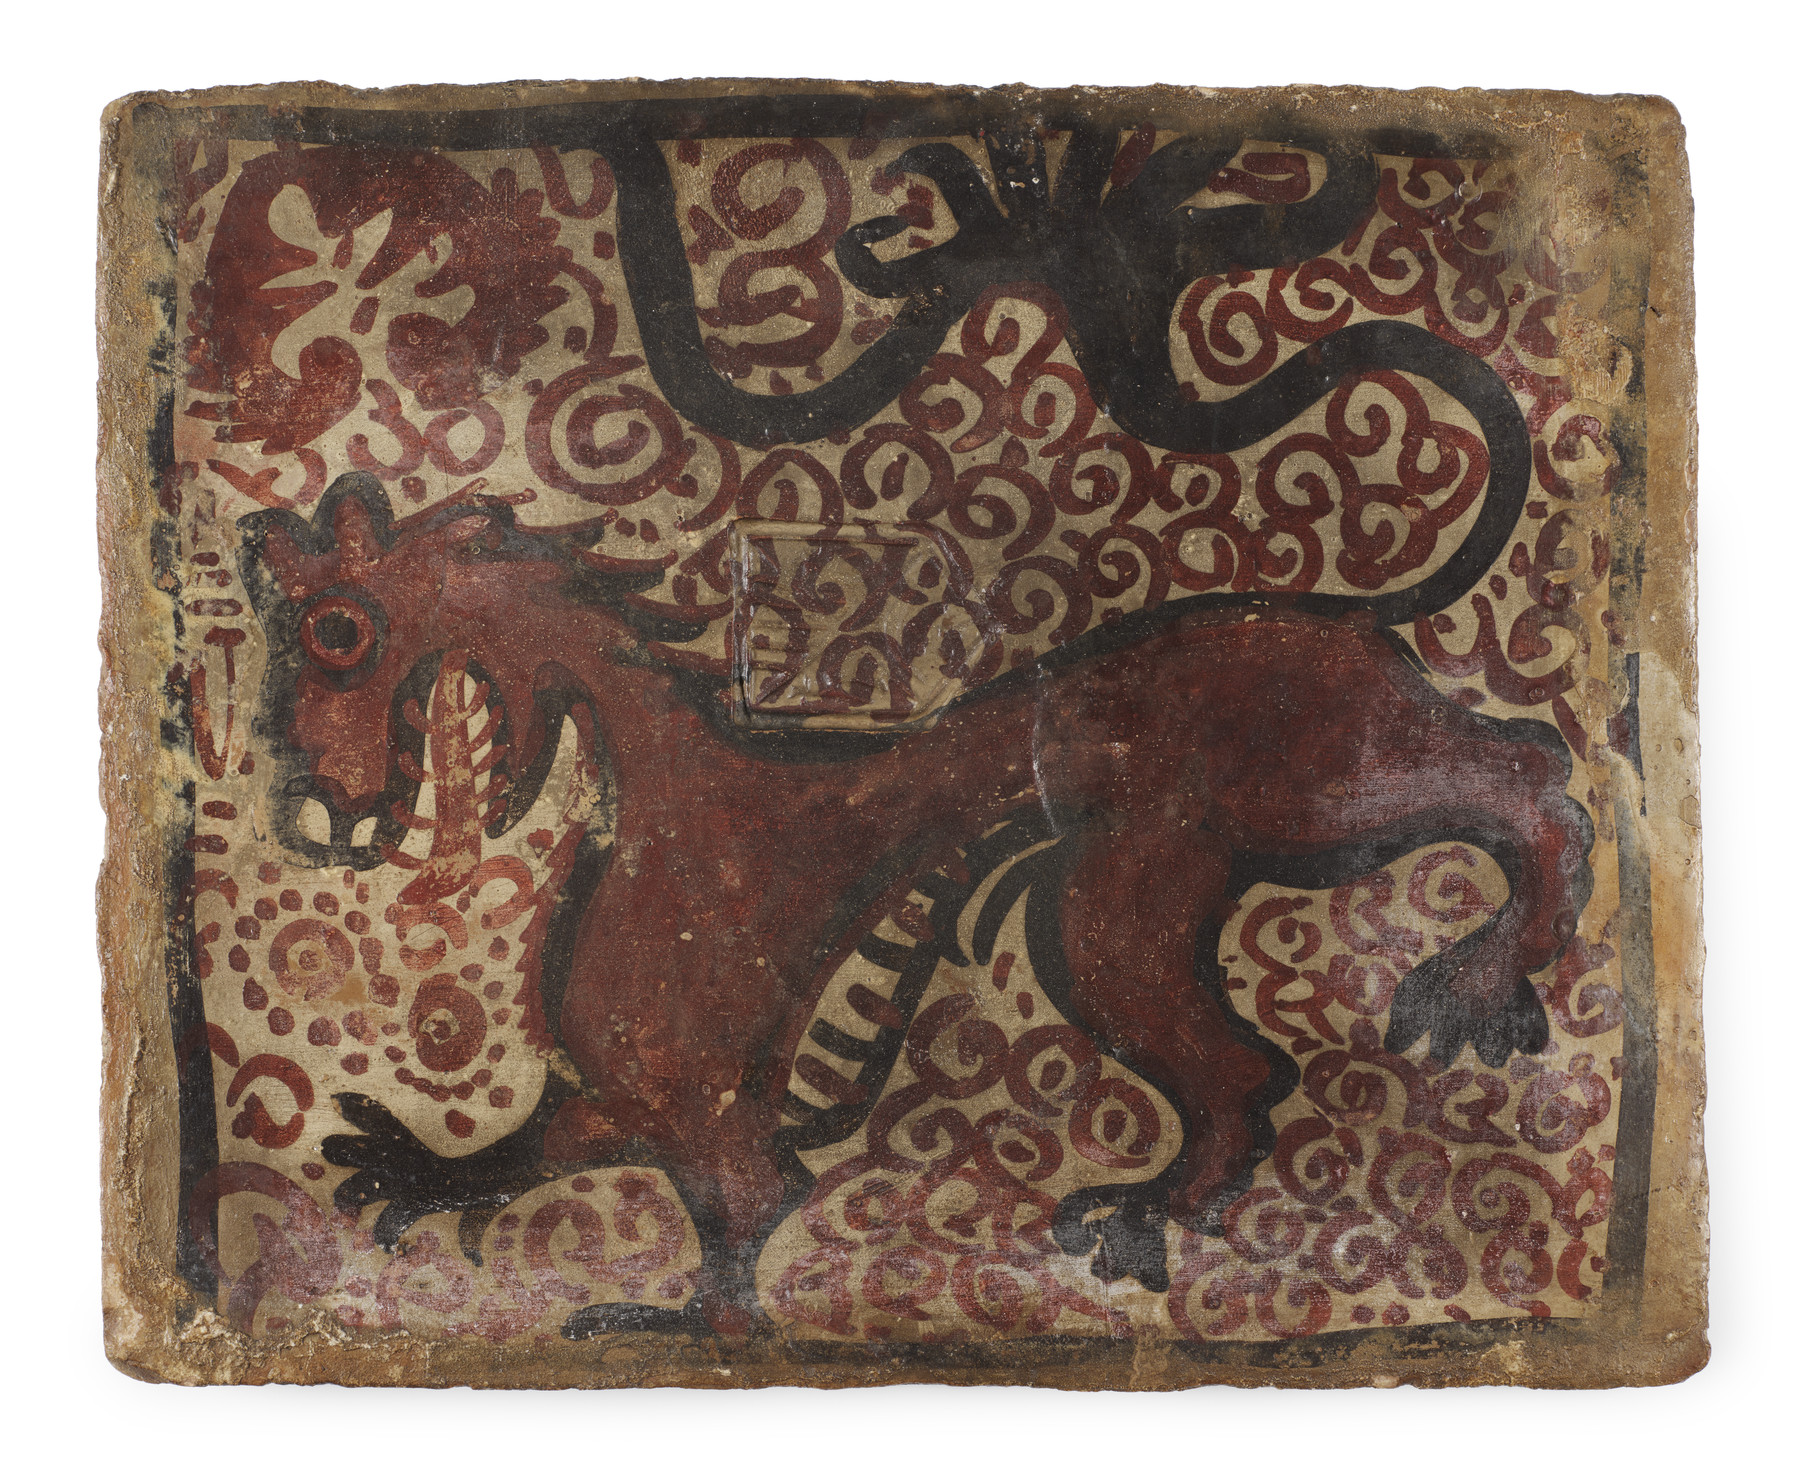 Image for Ceiling tile (socarrat) with heraldic lion (Arms of Dukes of Segorbe)